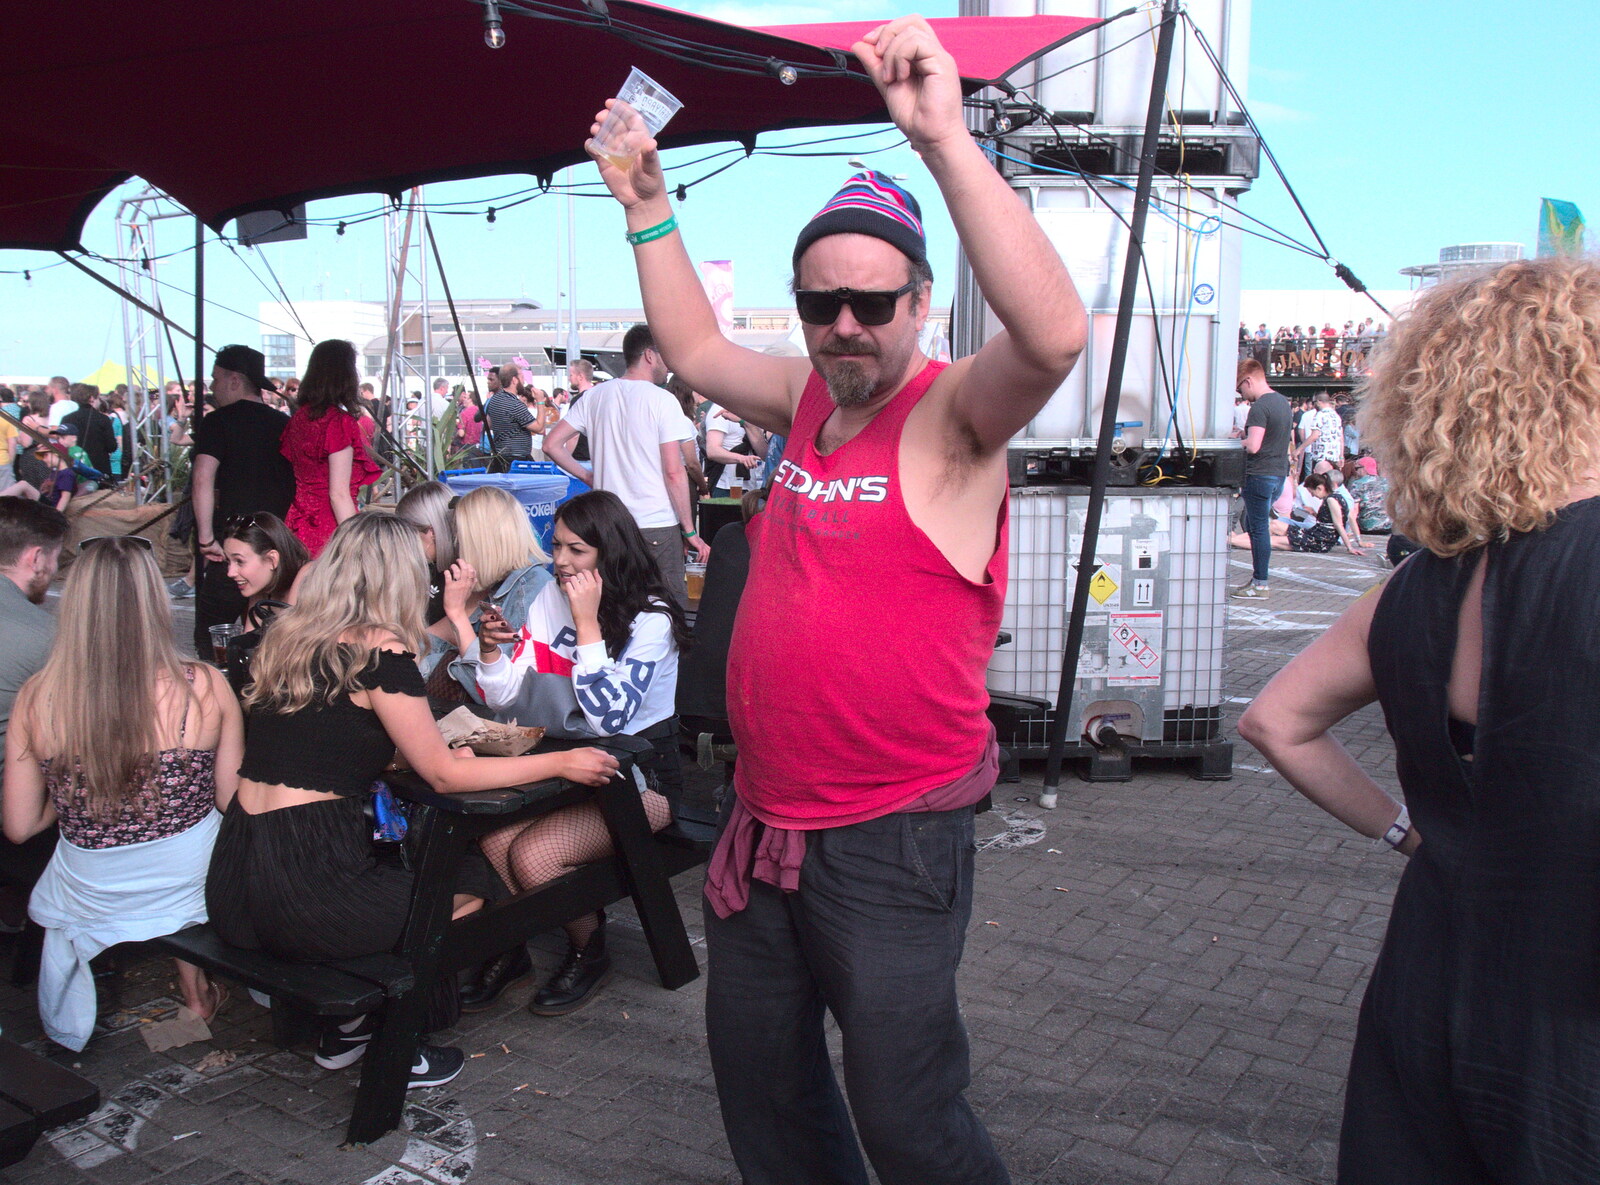 Noddy does some more moves from Beatyard Festival, Dún Laoghaire, County Dublin, Ireland - 5th August 2018